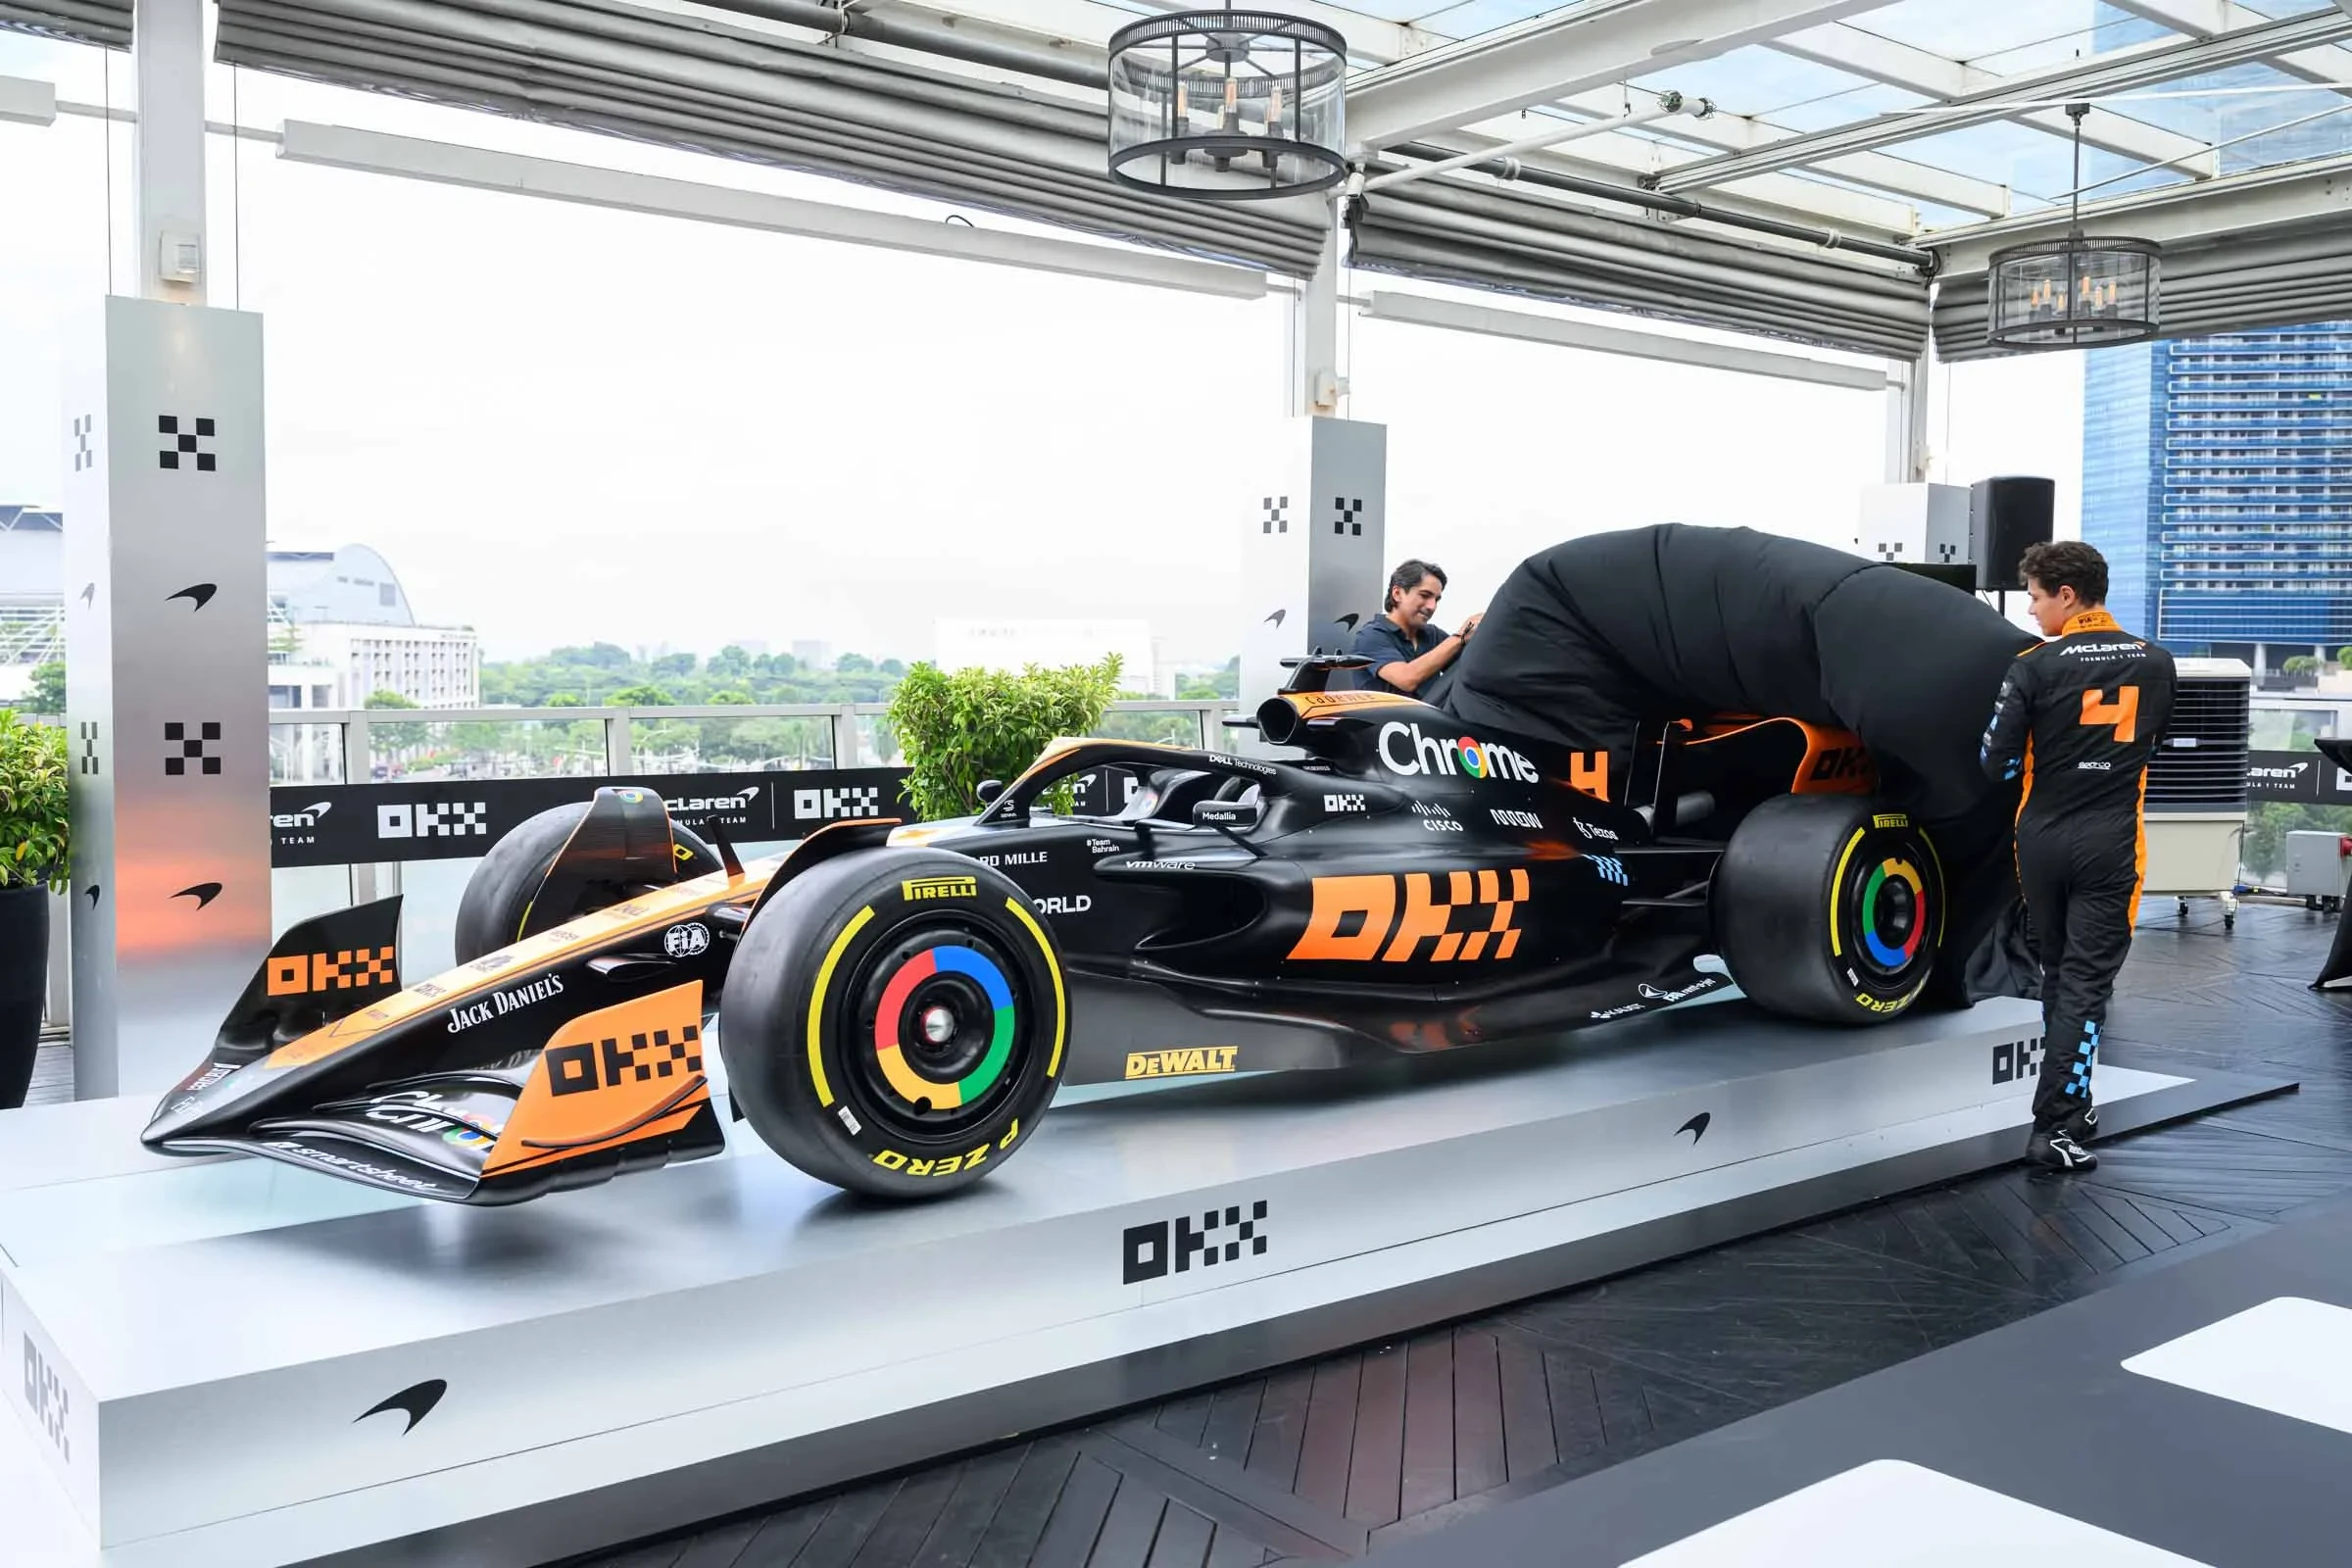 Haider Rafique and Lando Norris unveiling the MCL60 F1 car in a limited edition Stealth Mode livery - switching McLaren’s livery colorway by adding black to the team’s classic papaya trim